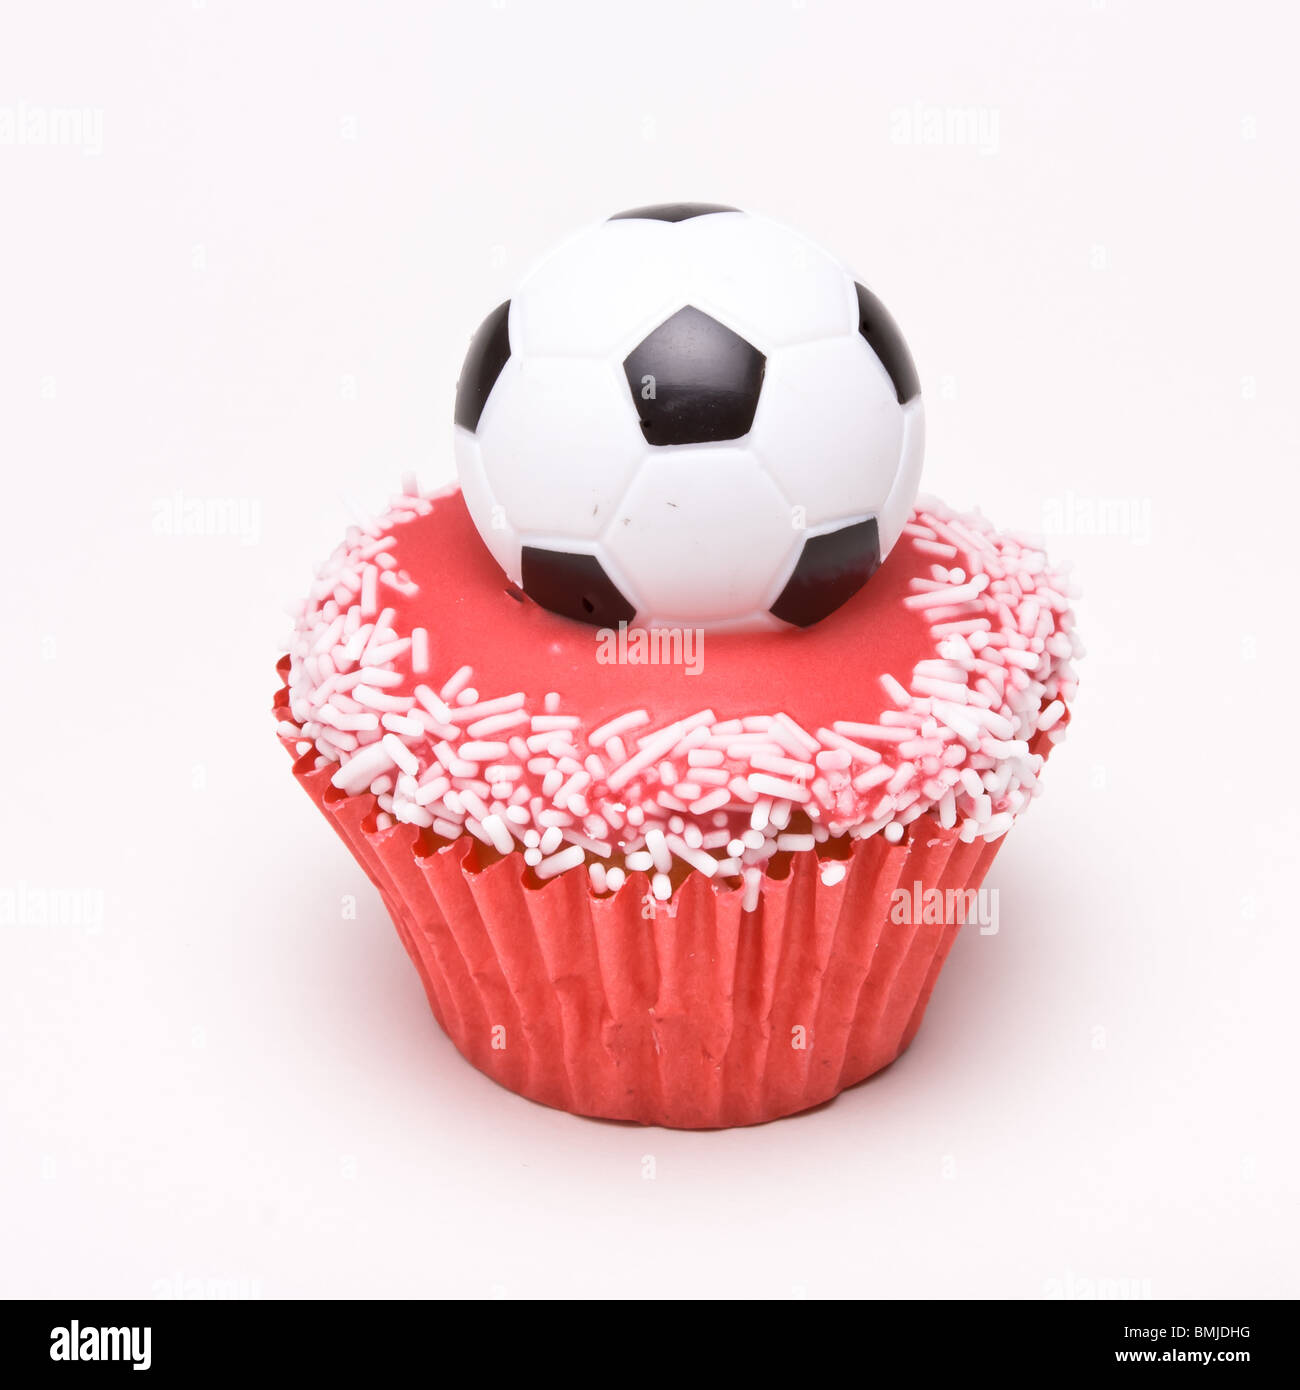 Soccer Cup Cake in the colours of england red and white for football supporters. Stock Photo